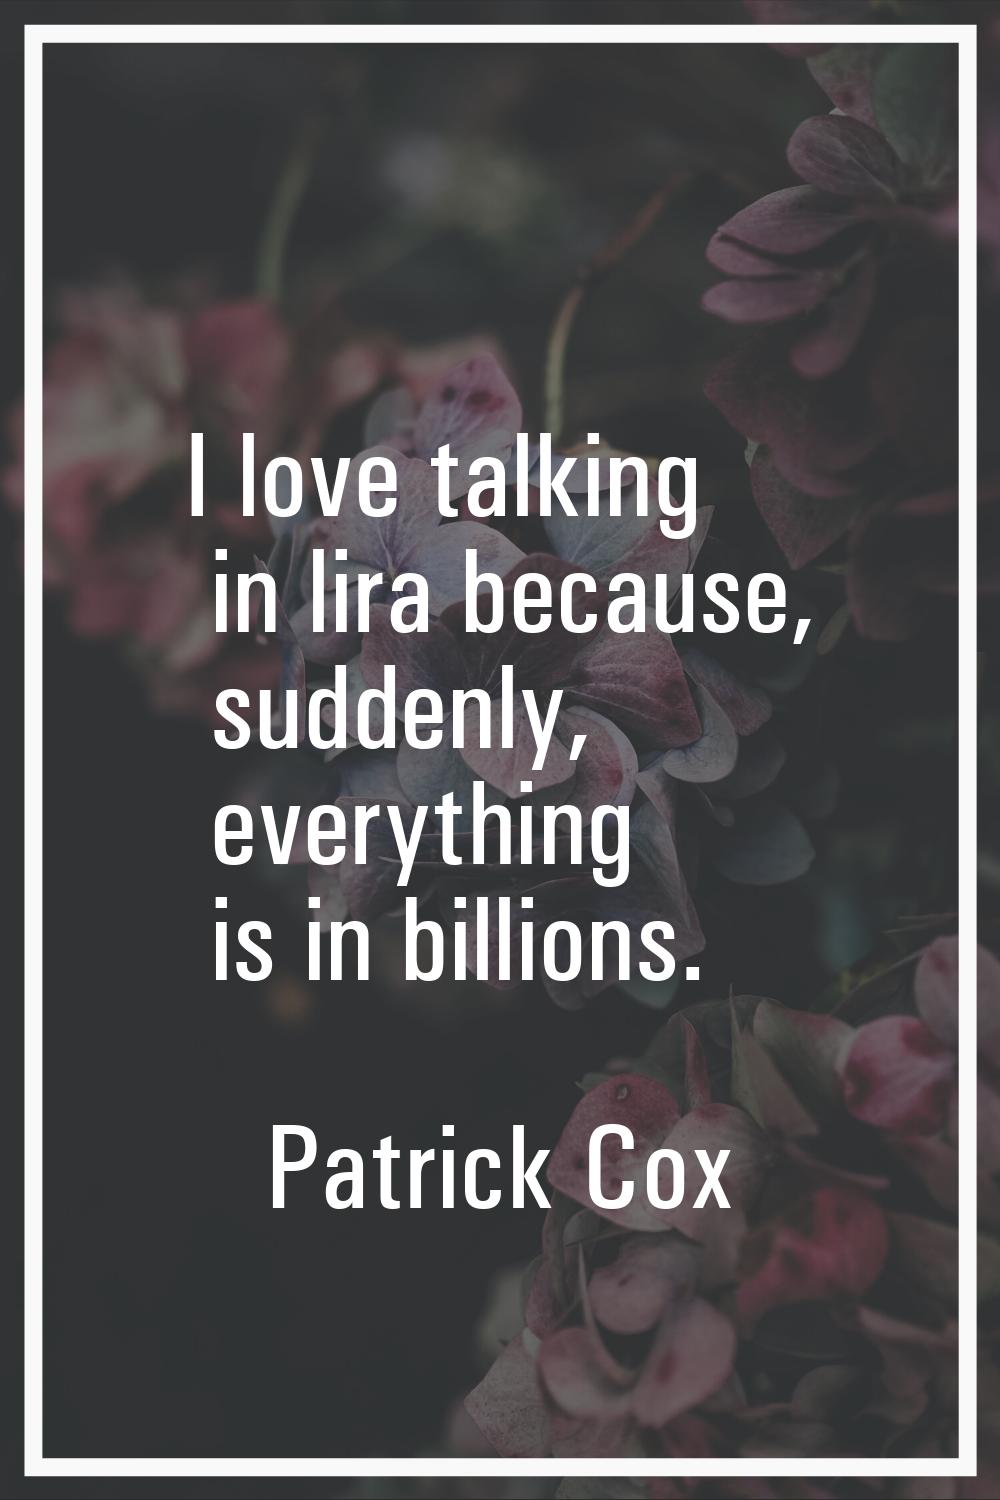 I love talking in lira because, suddenly, everything is in billions.